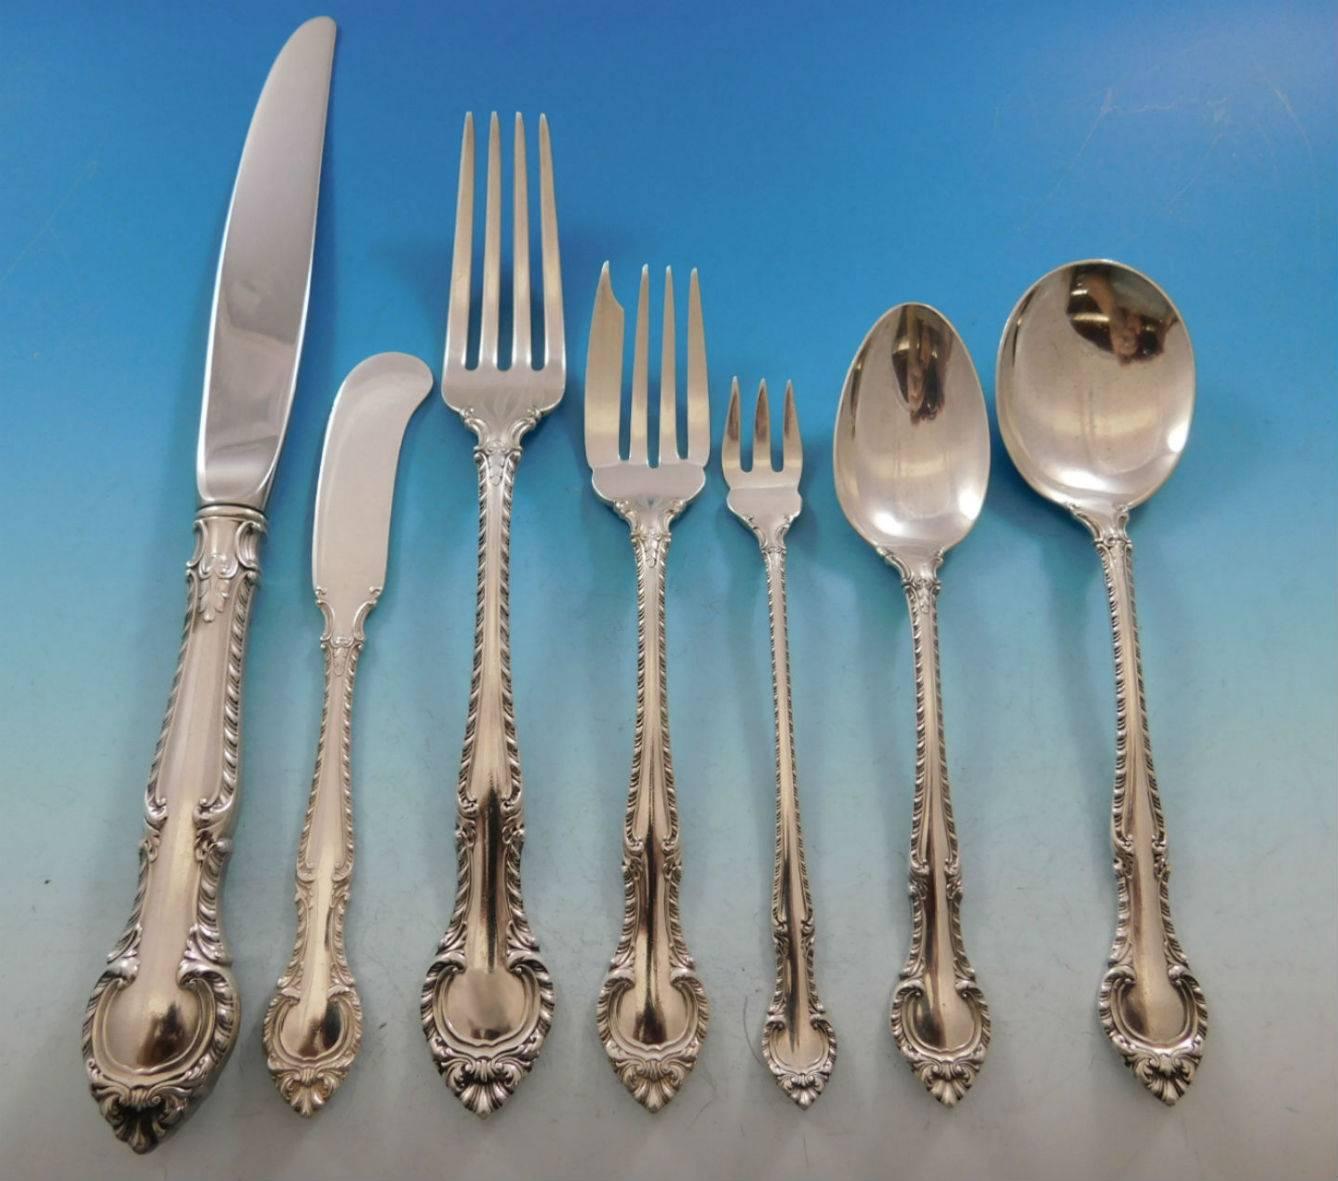 English Gadroon by Gorham Sterling Silver Flatware Set 12 Service 87 pcs Dinner In Excellent Condition For Sale In Big Bend, WI